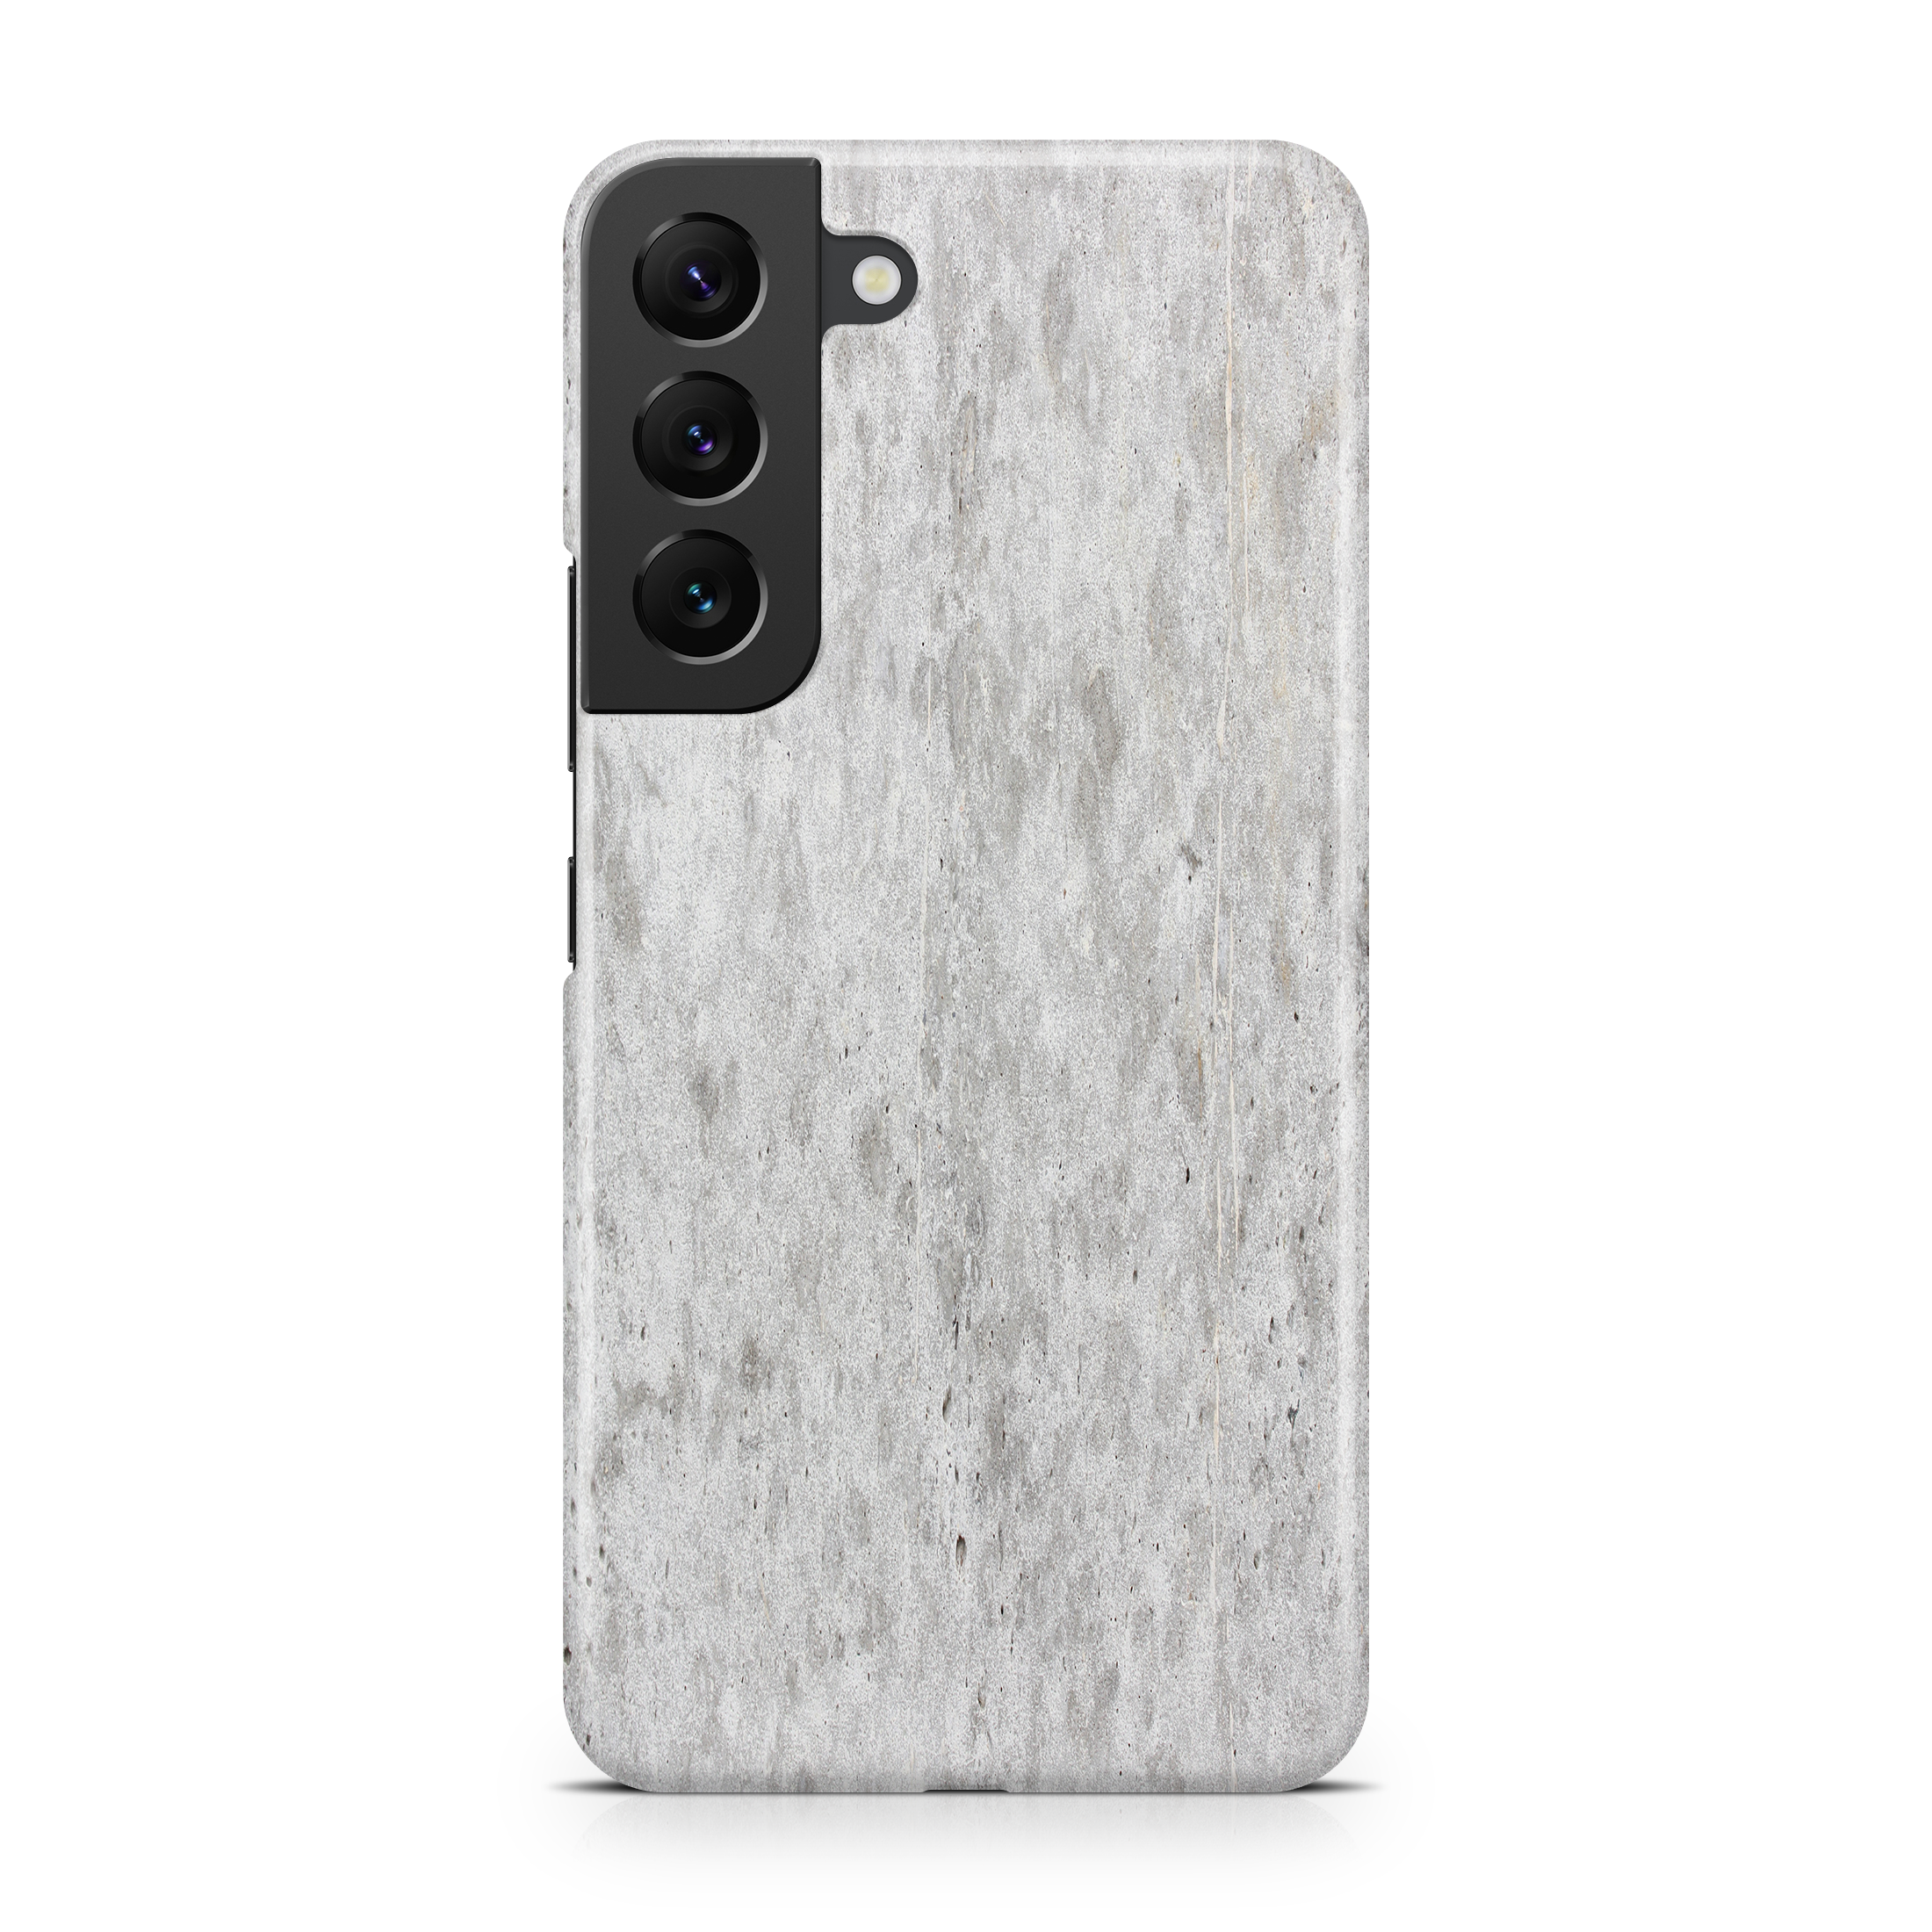 Smooth Concrete - Samsung phone case designs by CaseSwagger